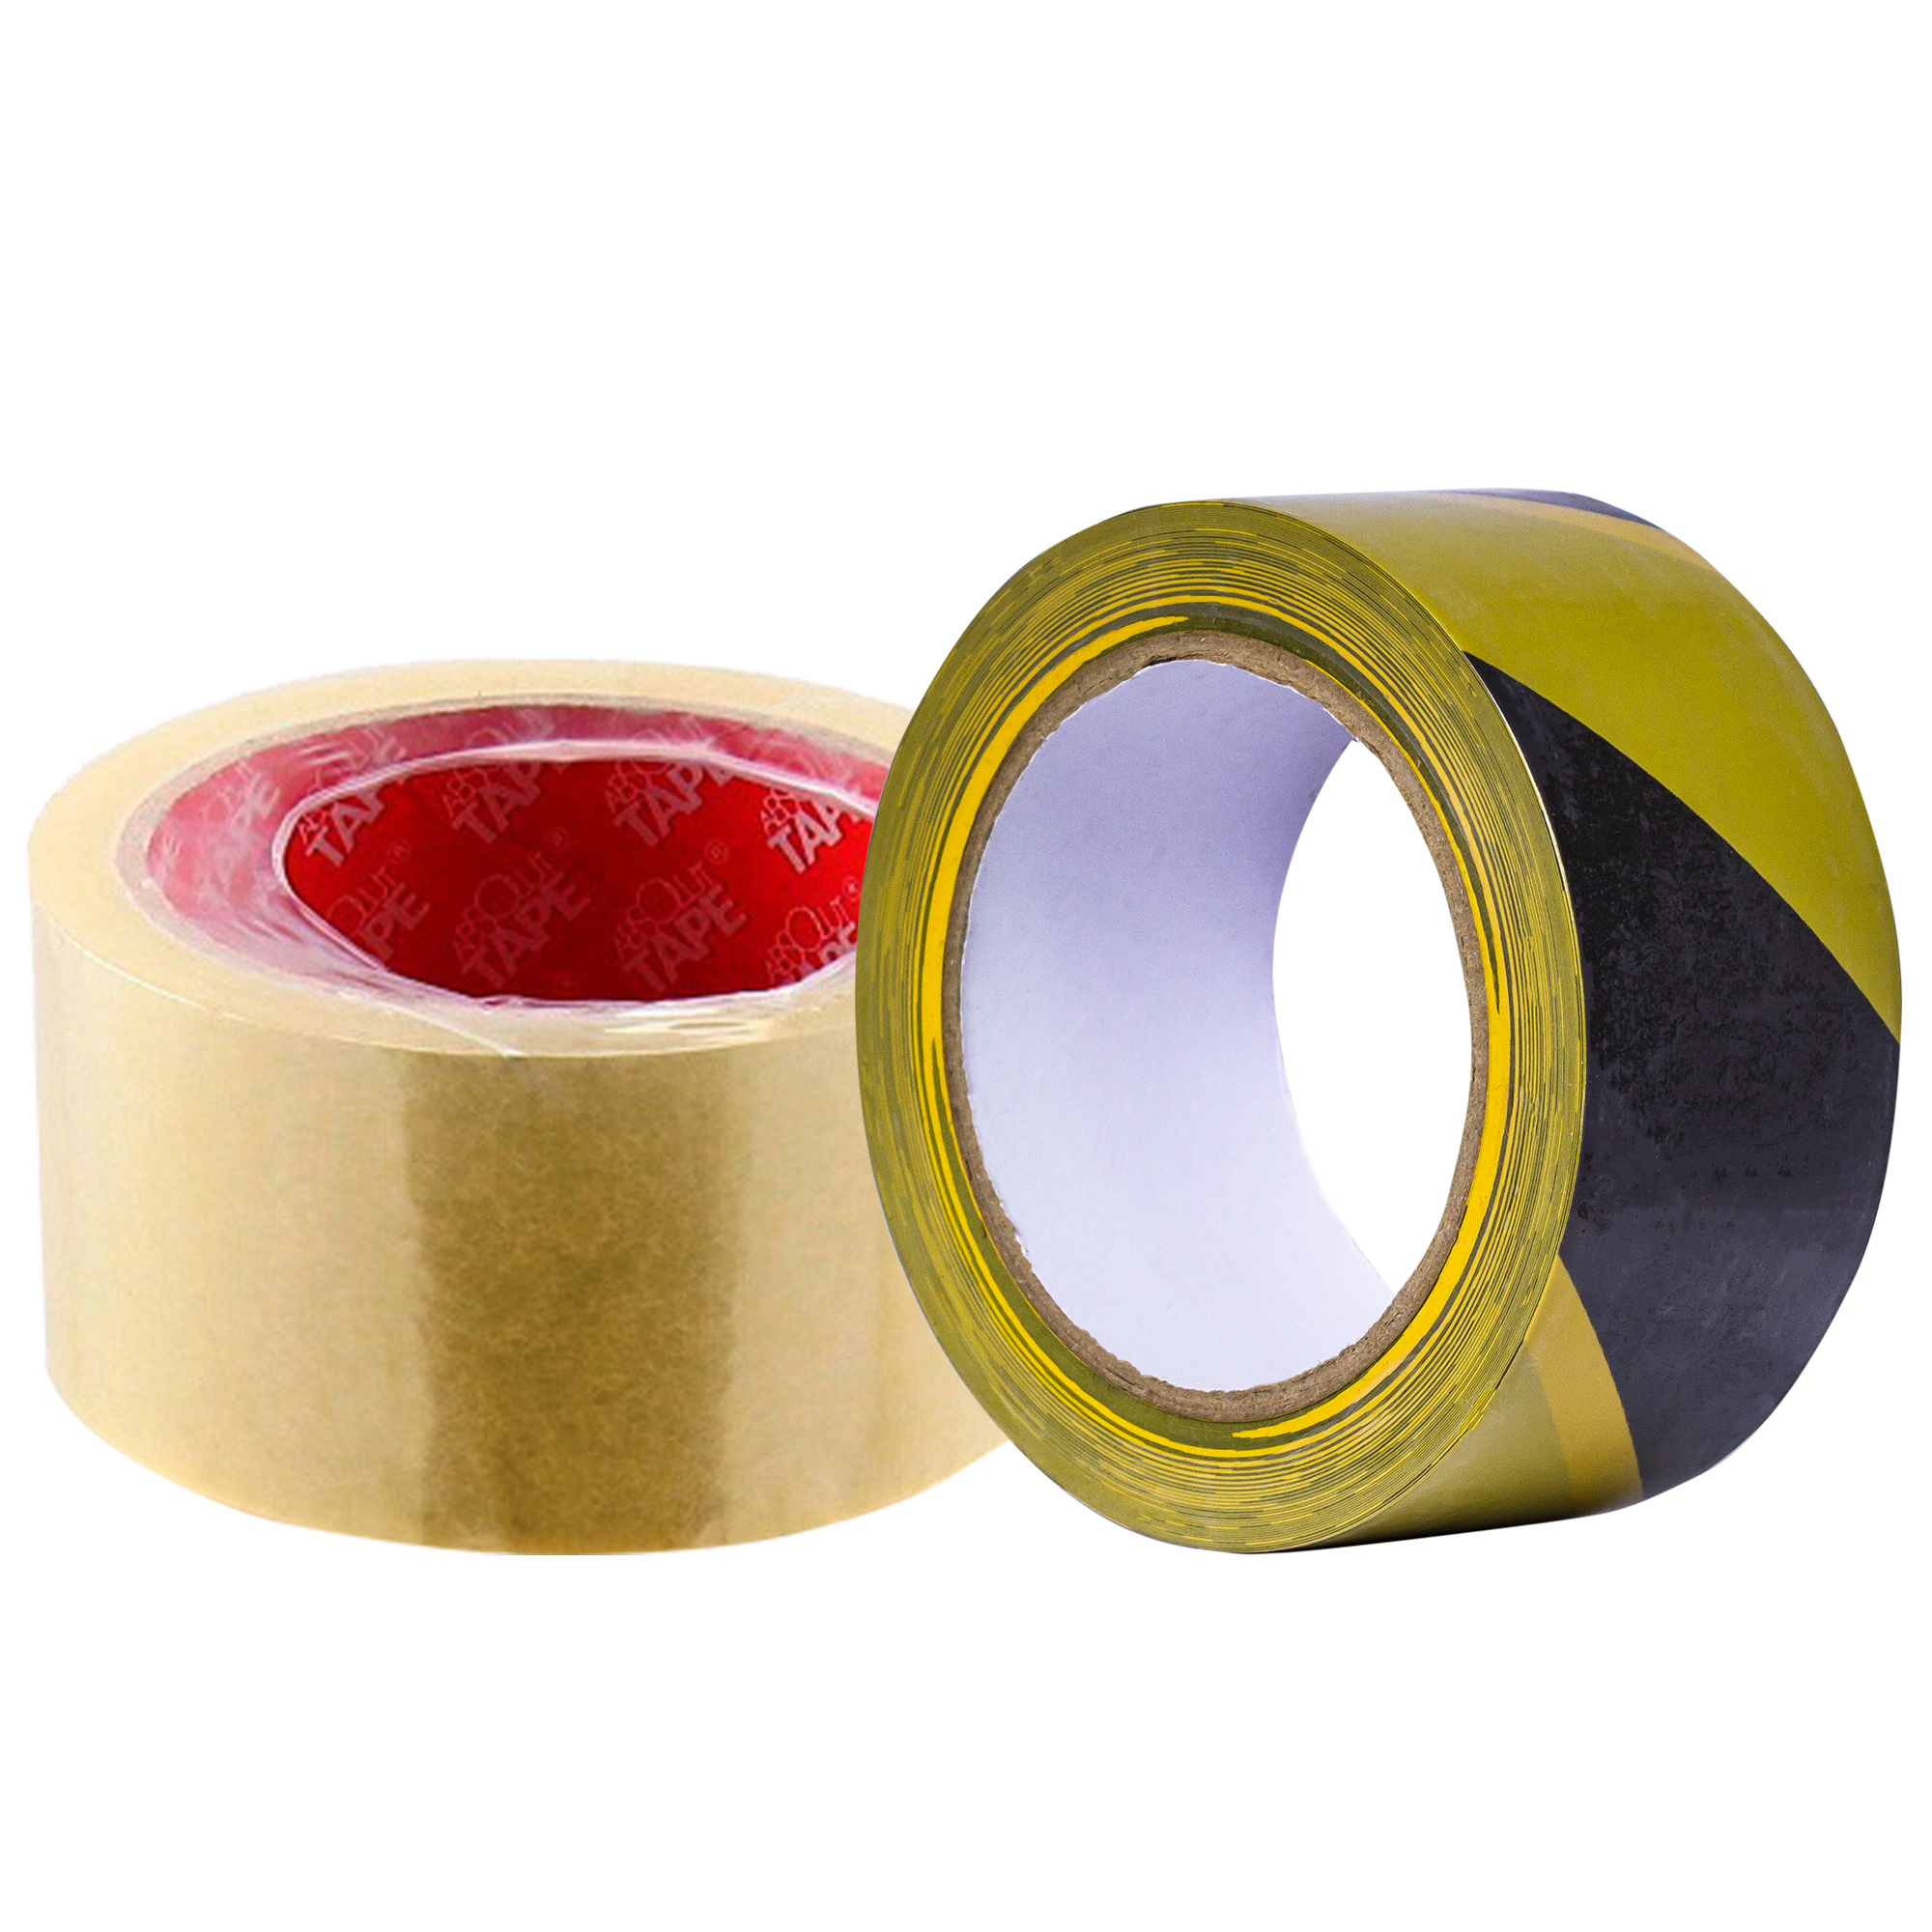 Birotics and Stationary/Stationery and Office Supplies/Adhesive Tape and Applicators